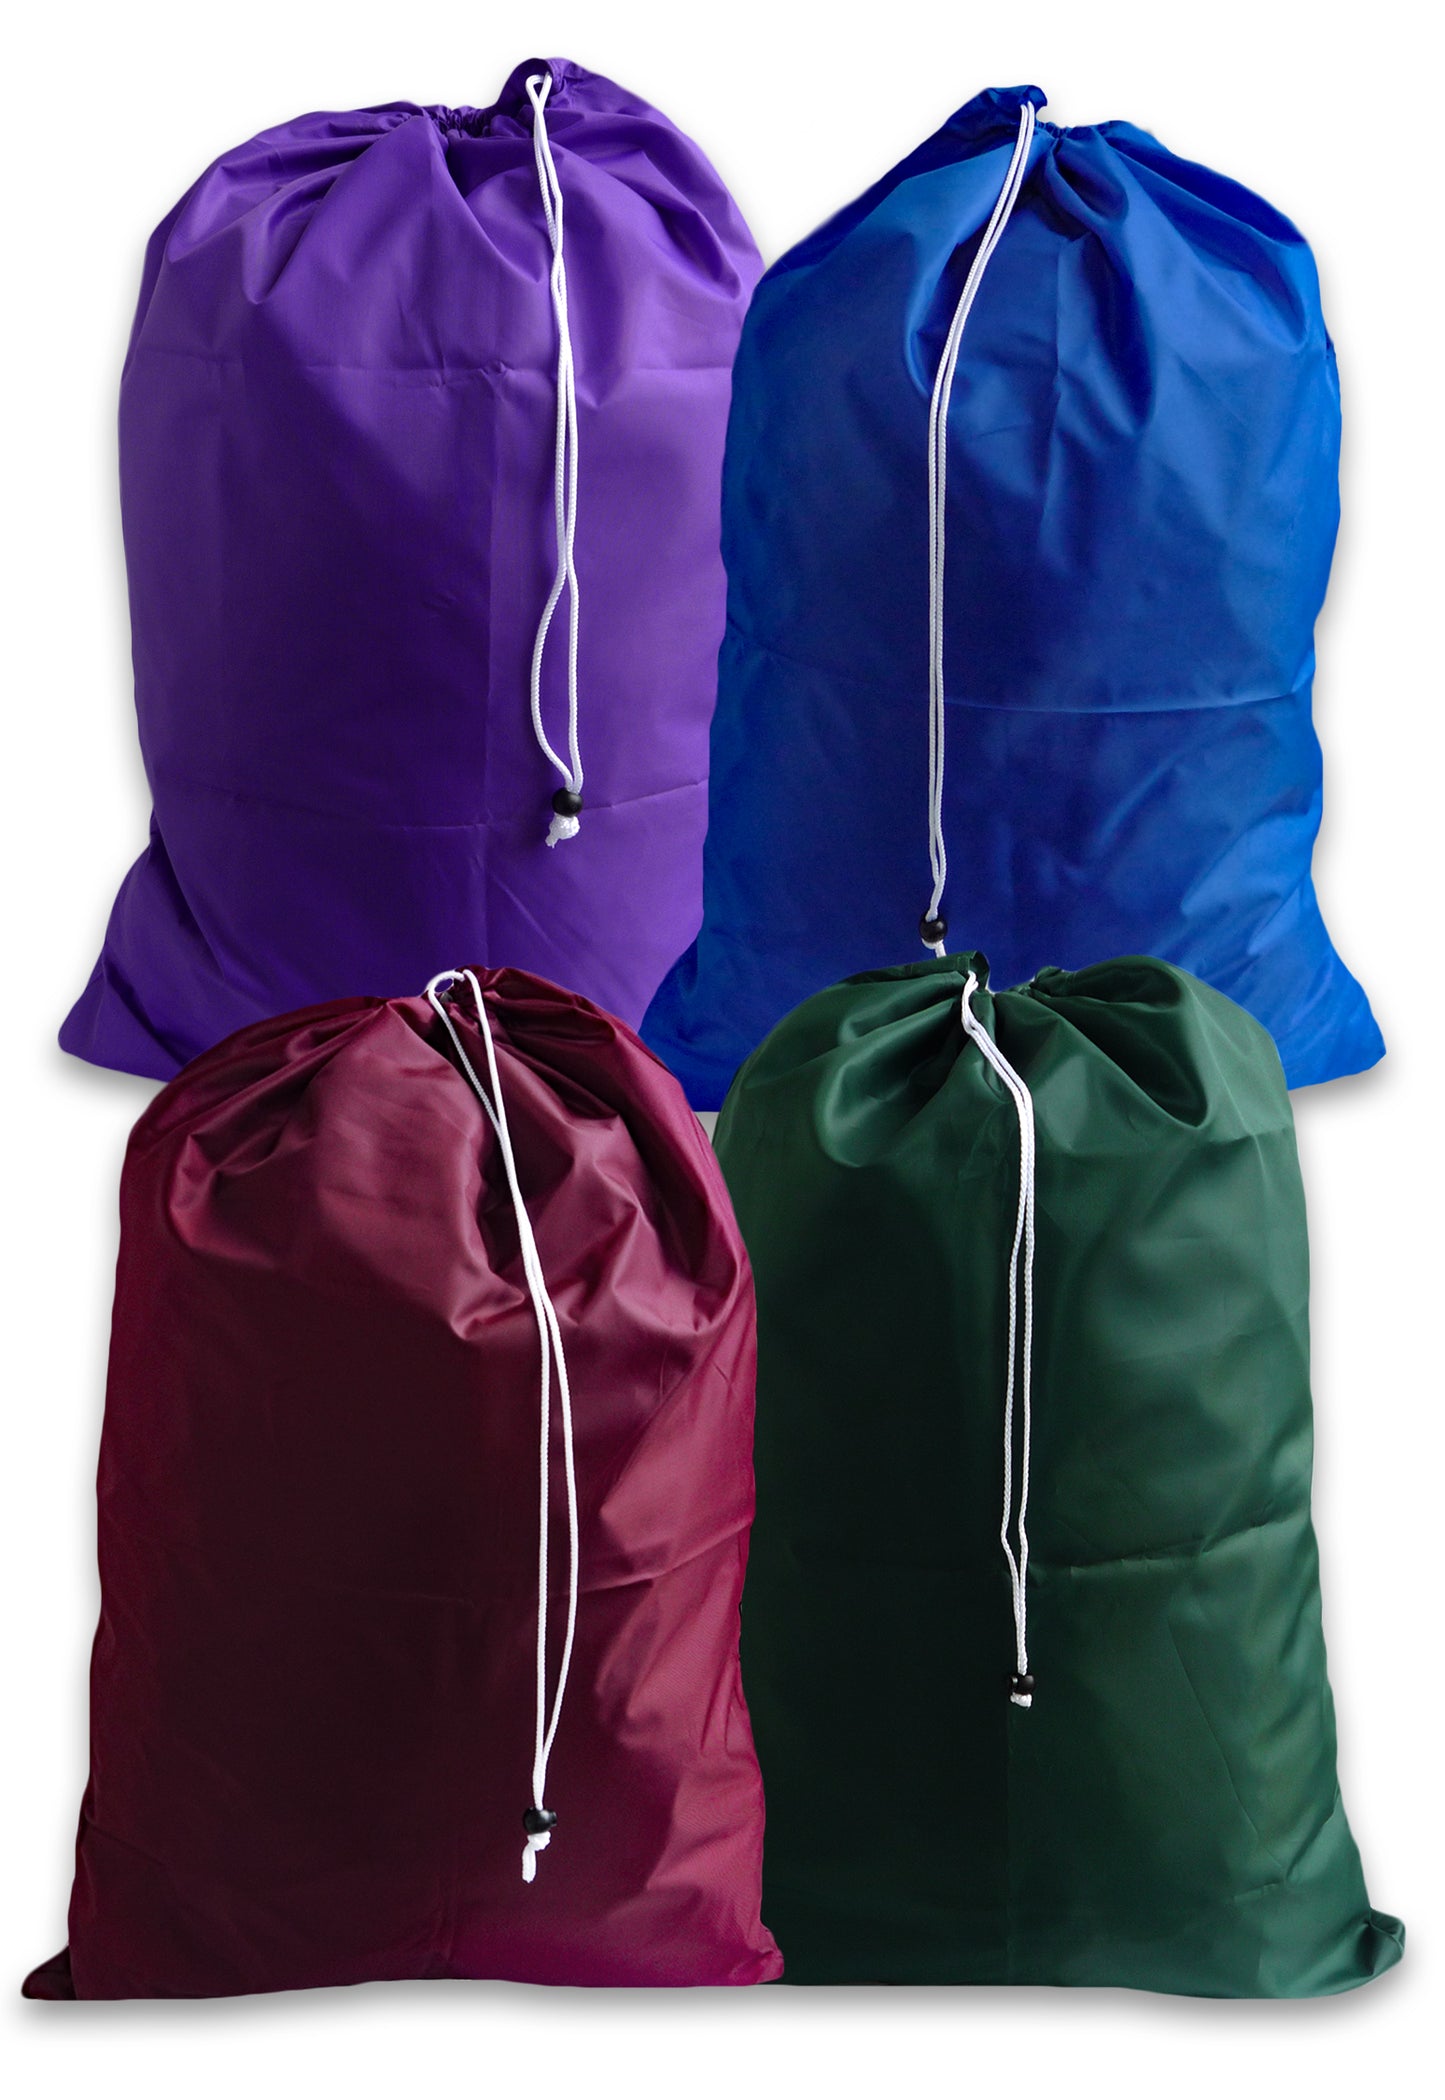 Small 22x28 Drawstring Laundry Bags 5 Pack